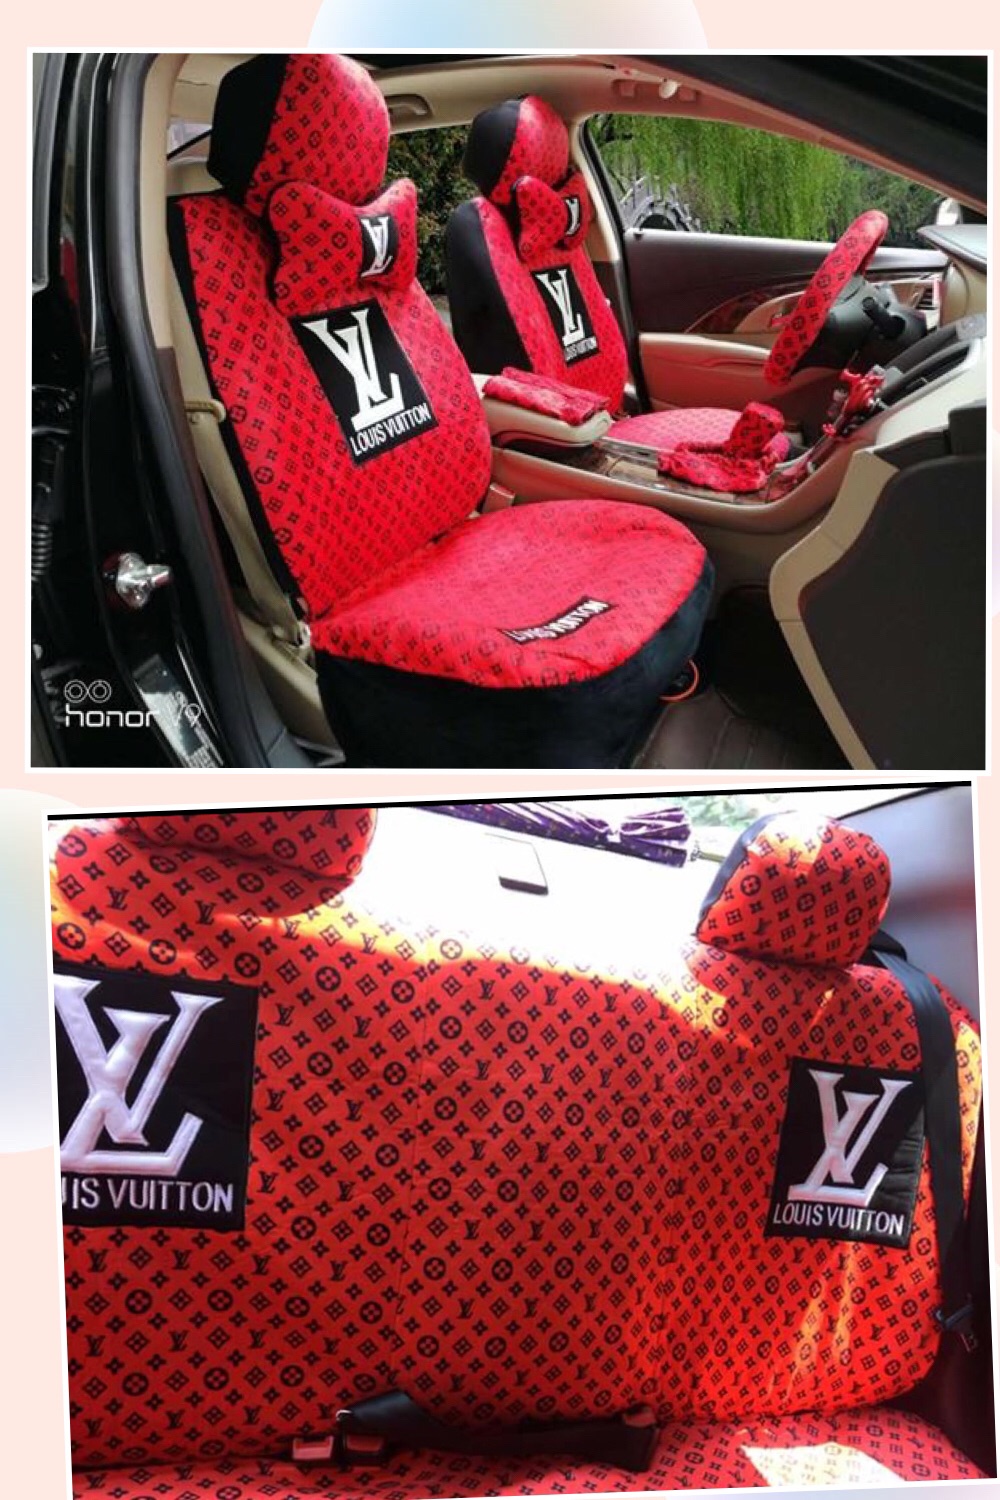 Shop Seat Cover Lv online